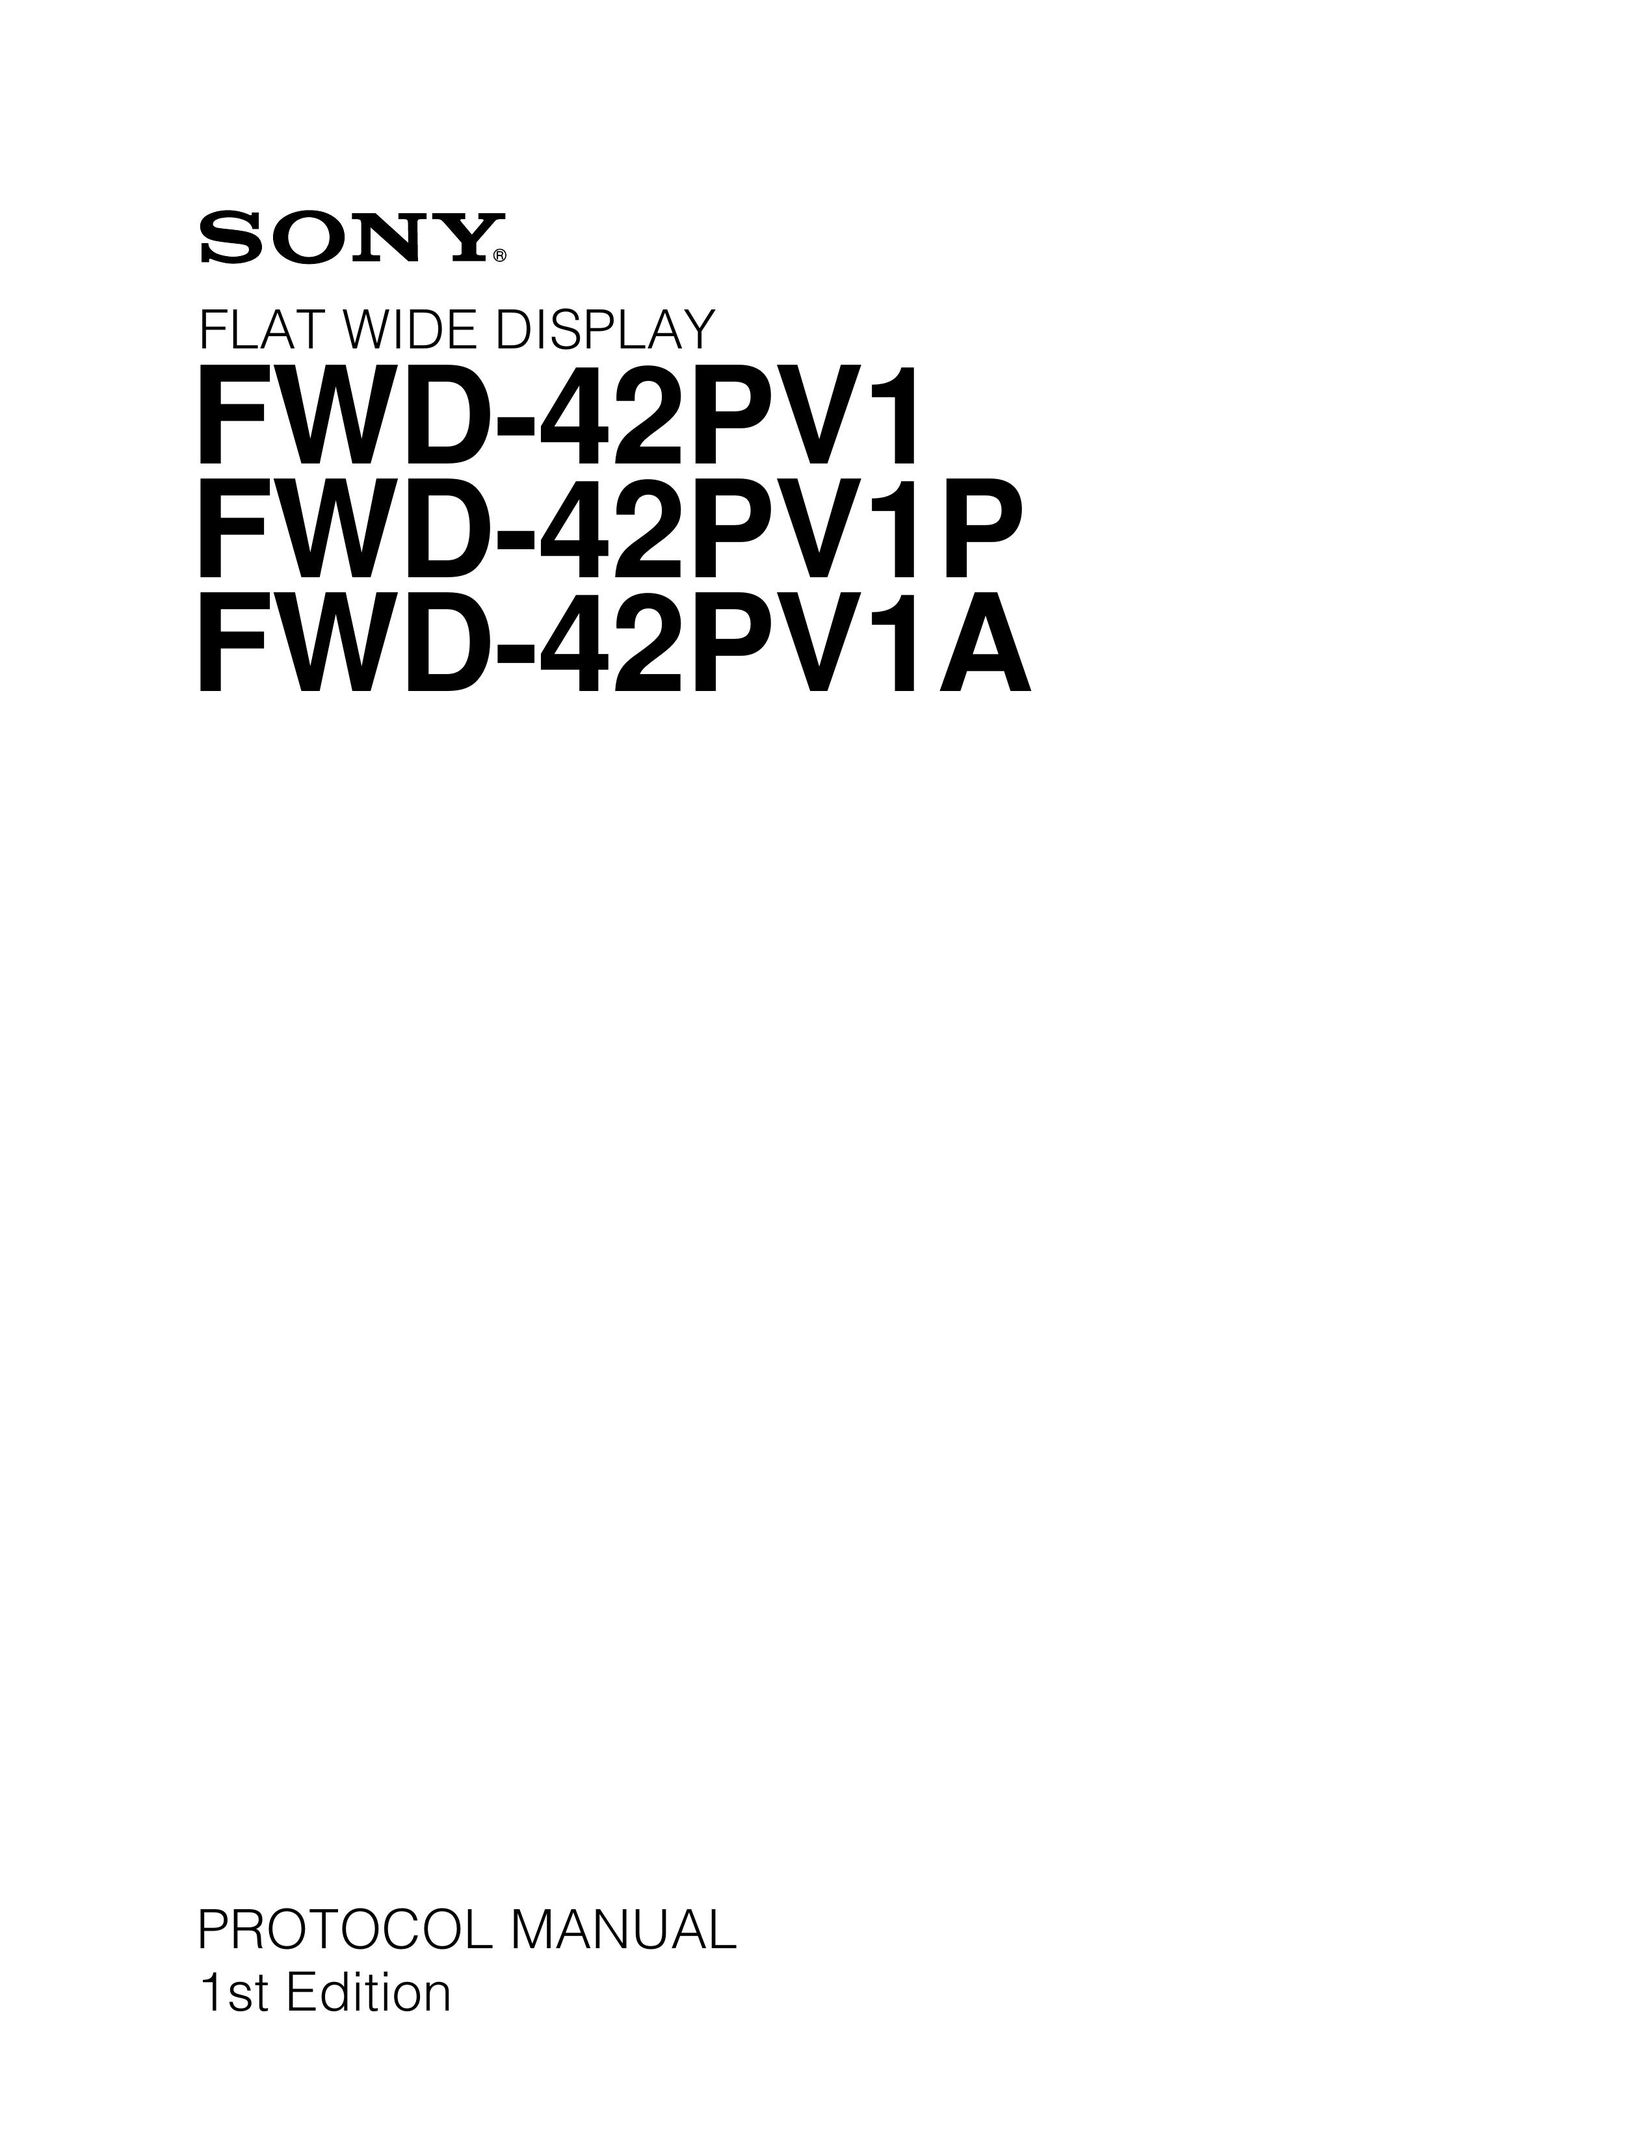 Sony FWD-42PVP Home Theater Screen User Manual